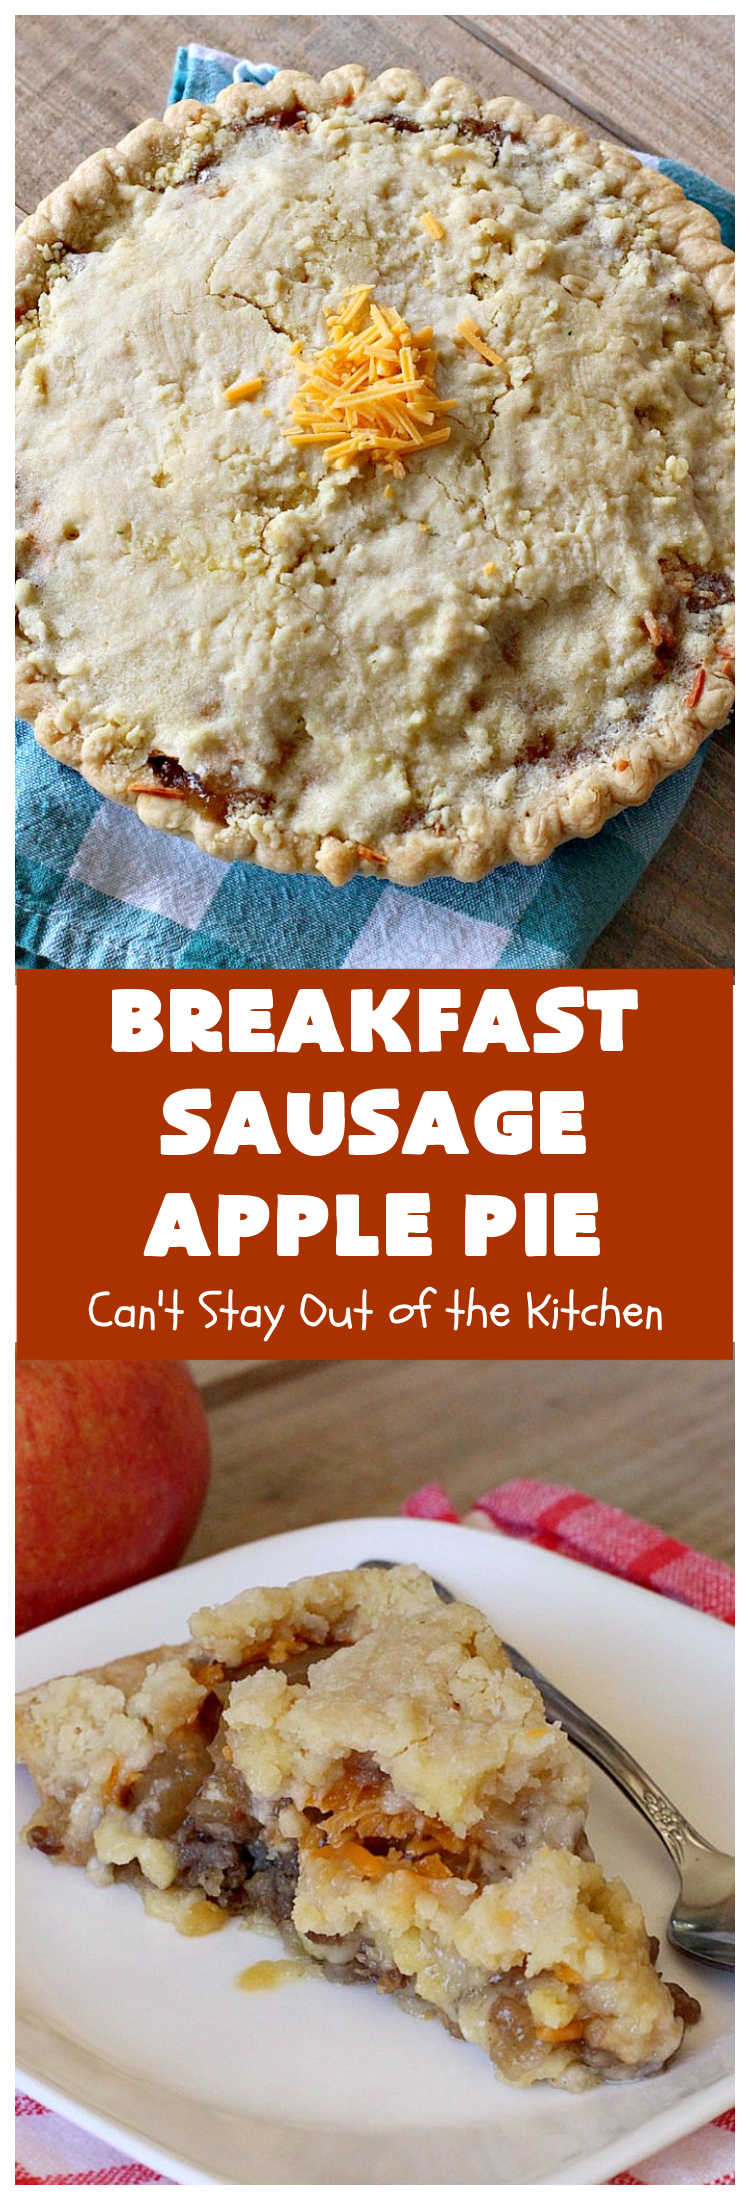 Breakfast Sausage Apple Pie | Can't Stay Out of the Kitchen | This is my favorite #breakfast #pie. It's filled with #sausage, #ApplePieFilling, #CheddarCheese & a delicious streusel topping. It's hearty, filling & satisfying comfort food that's terrific for a #holiday breakfast like #MemorialDay or #FathersDay. #BreakfastPie #SausageApplePie #BreakfastSausageApplePie FathersDayBreakfast #HolidayBreakfastBreakfast Sausage Apple Pie | Can't Stay Out of the Kitchen | This is my favorite #breakfast #pie. It's filled with #sausage, #ApplePieFilling, #CheddarCheese & a delicious streusel topping. It's hearty, filling & satisfying comfort food that's terrific for a #holiday breakfast like #MemorialDay or #FathersDay. #BreakfastPie #SausageApplePie #BreakfastSausageApplePie FathersDayBreakfast #HolidayBreakfast